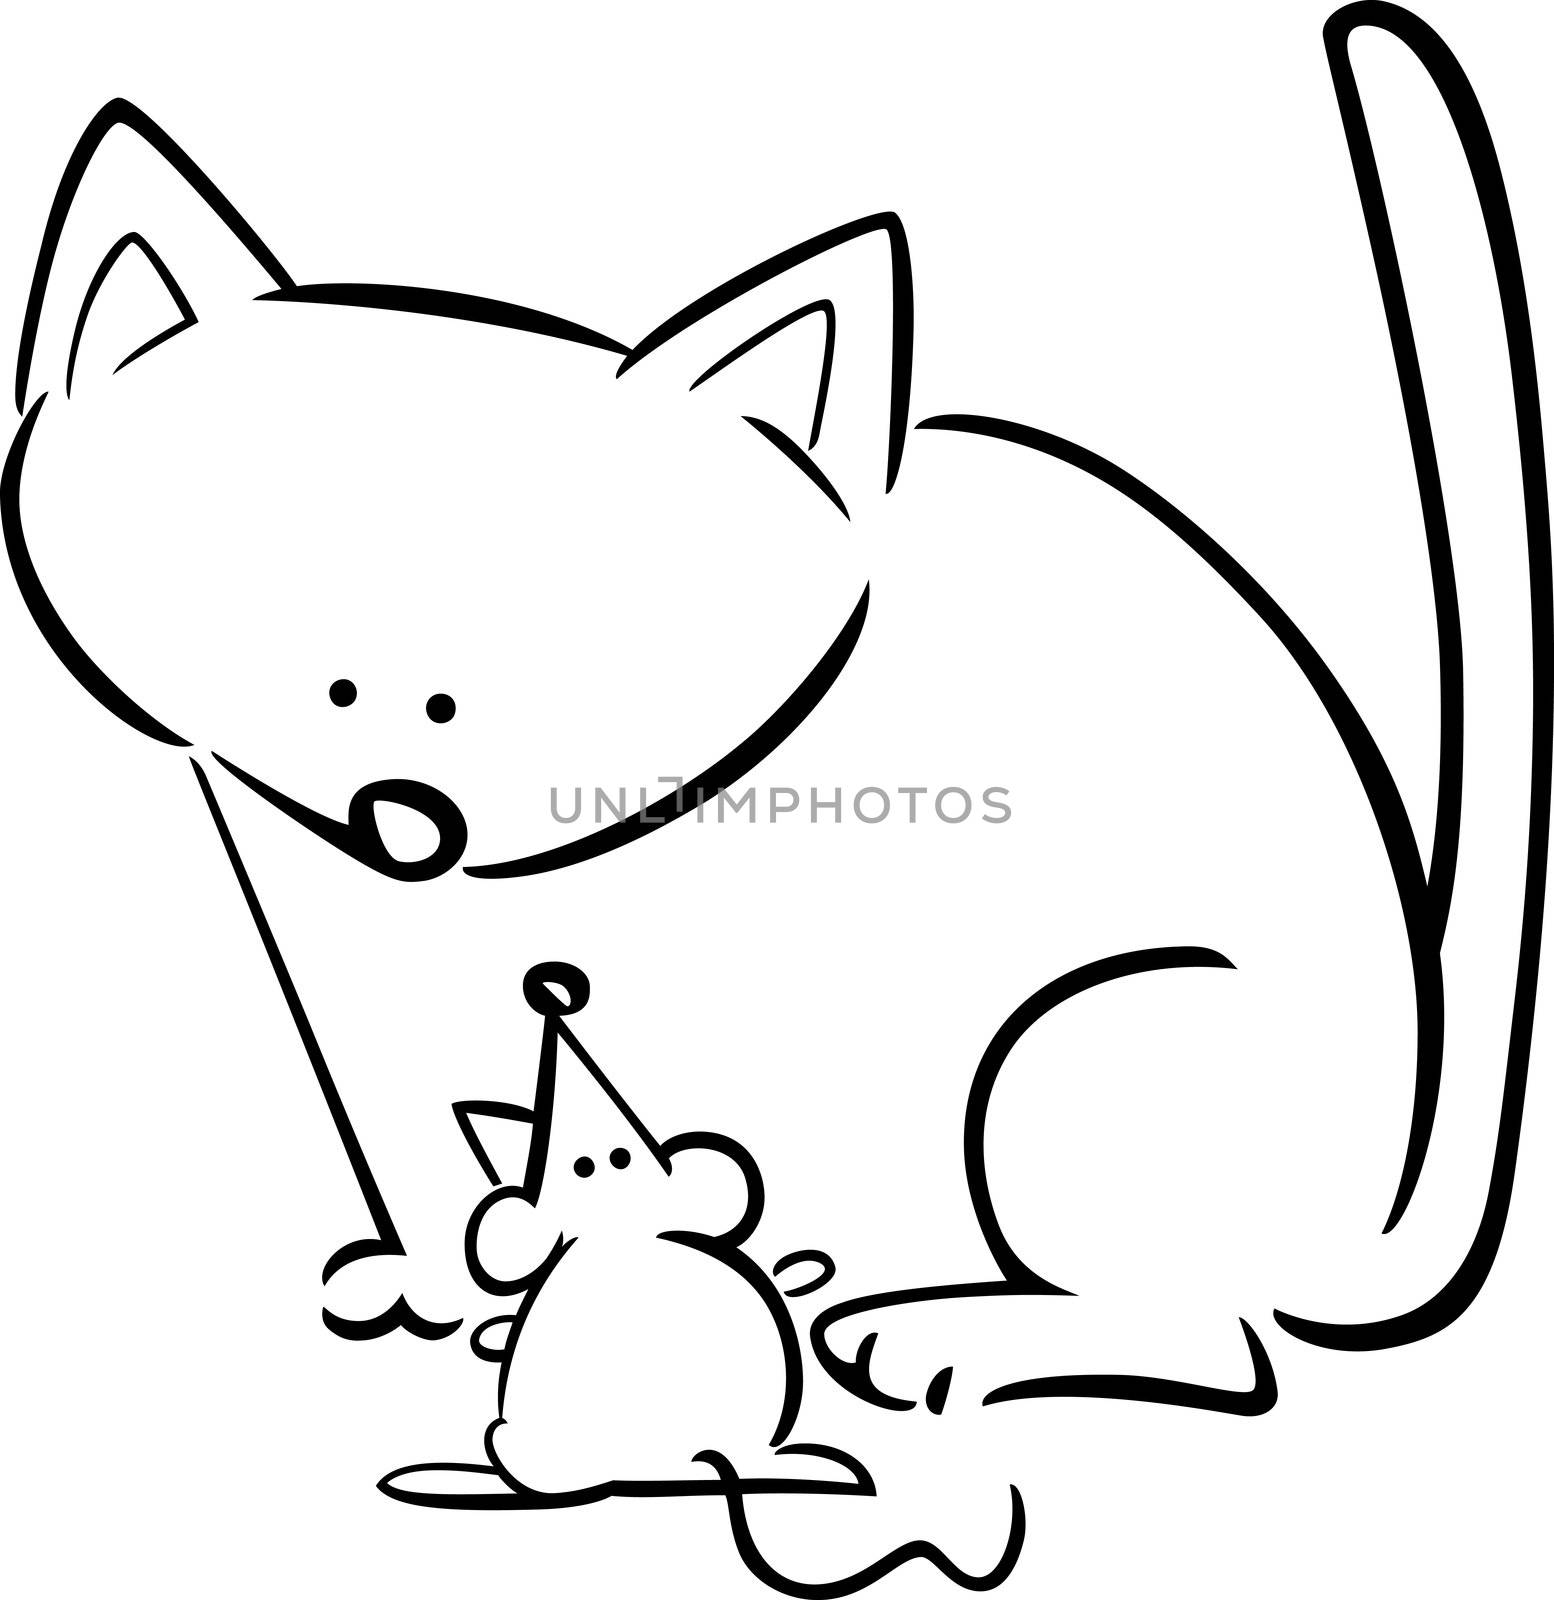 cartoon doodle illustration of kitten and mouse for coloring book